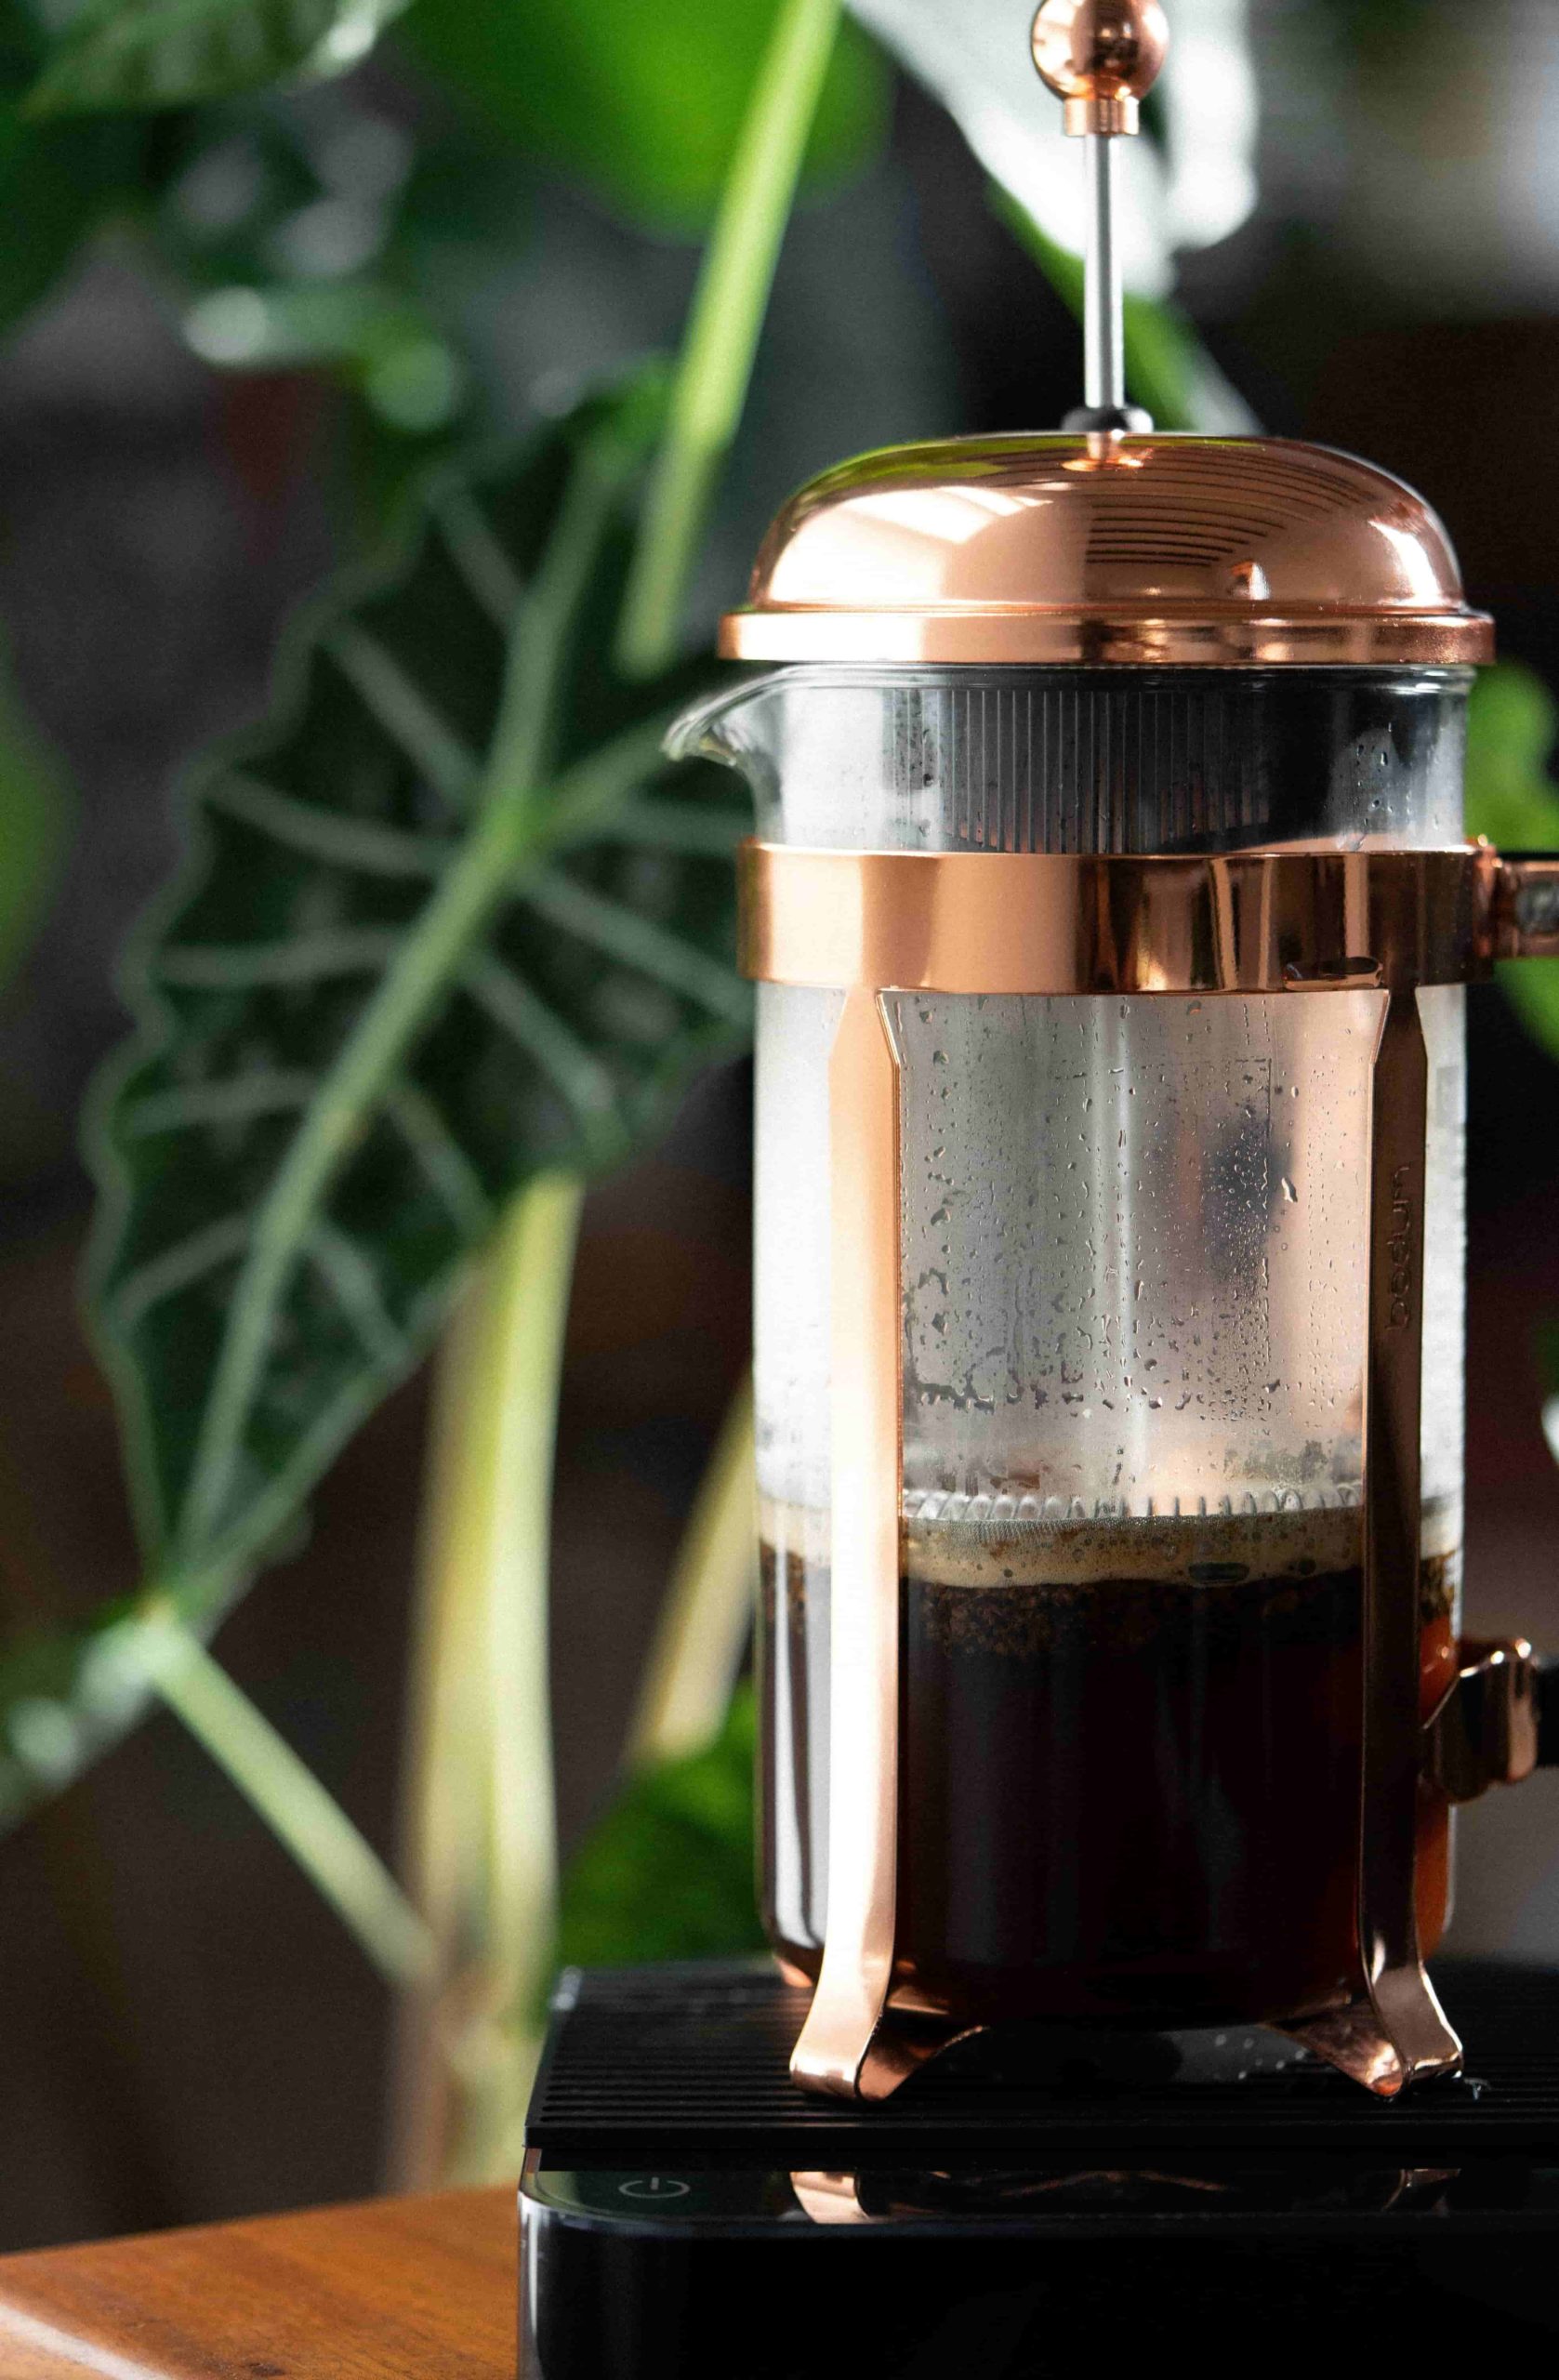 Classic Bodum Glass and Copper French Press with brewed coffee inside atop an Acaia scale with indoor plants background